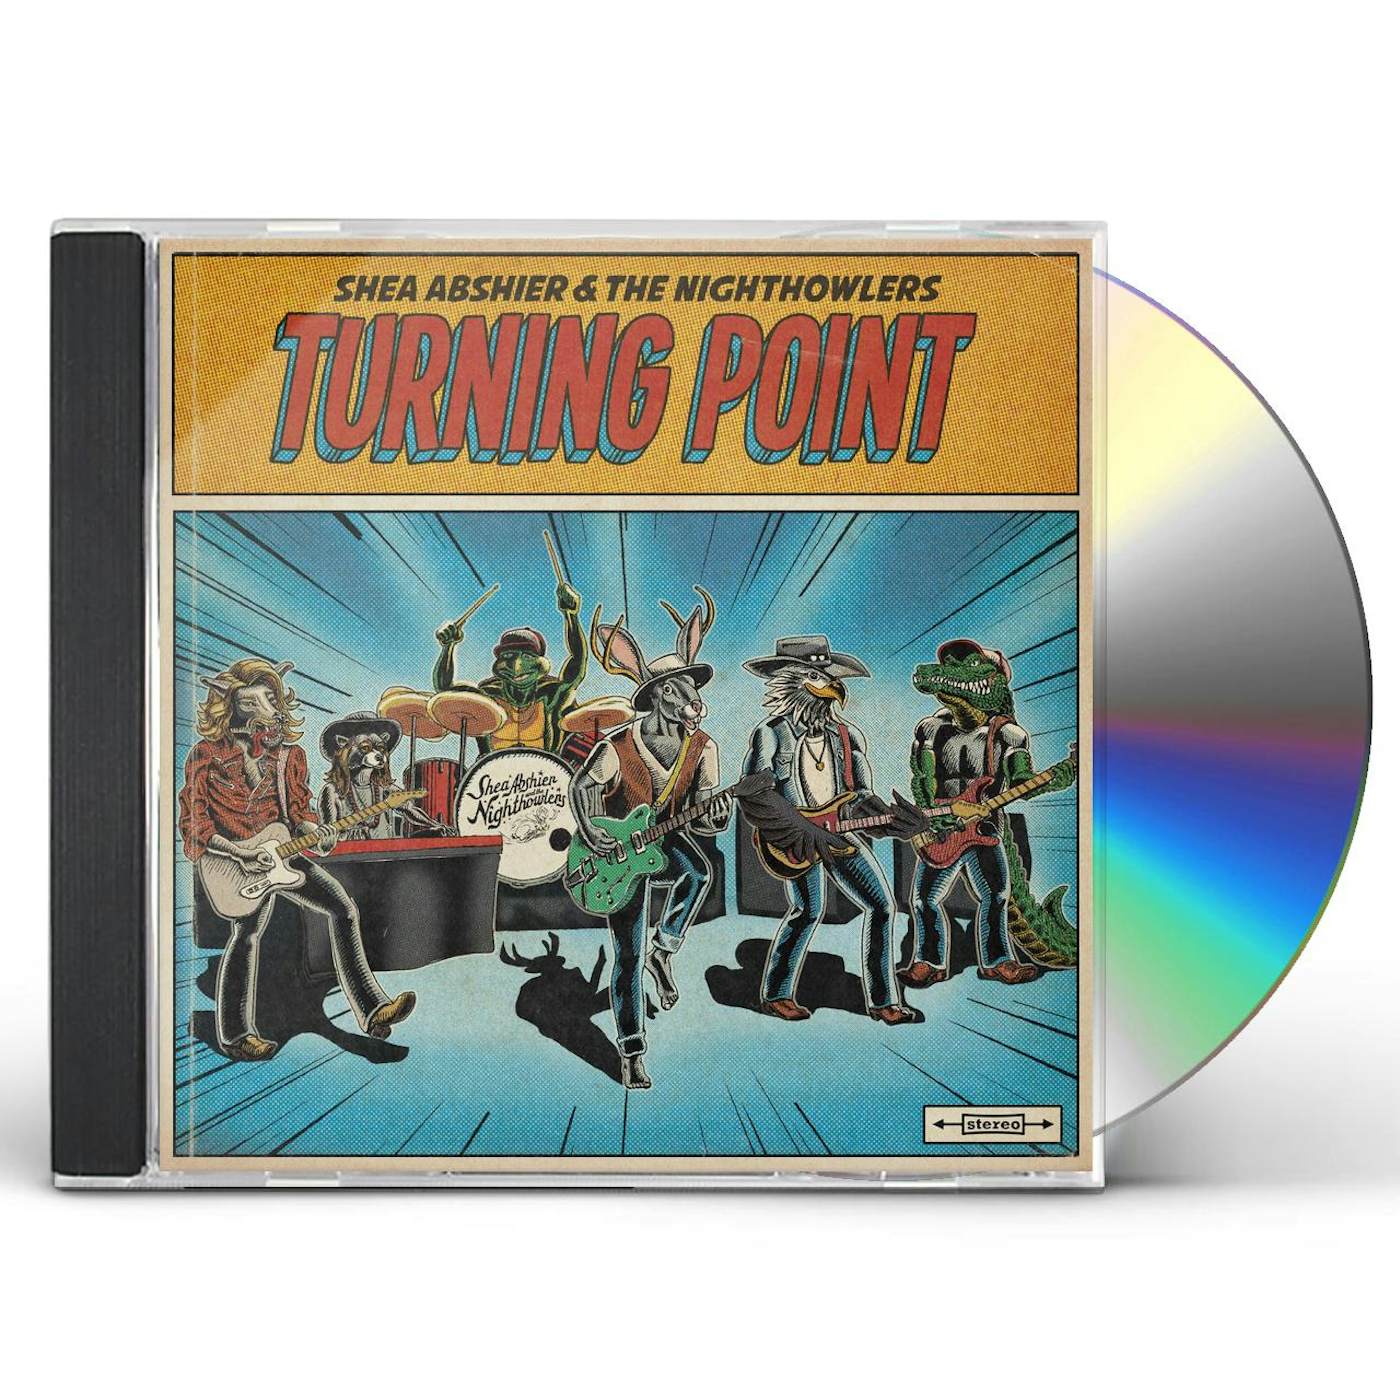 Shea Abshier & the Nighthowlers TURNING POINT CD